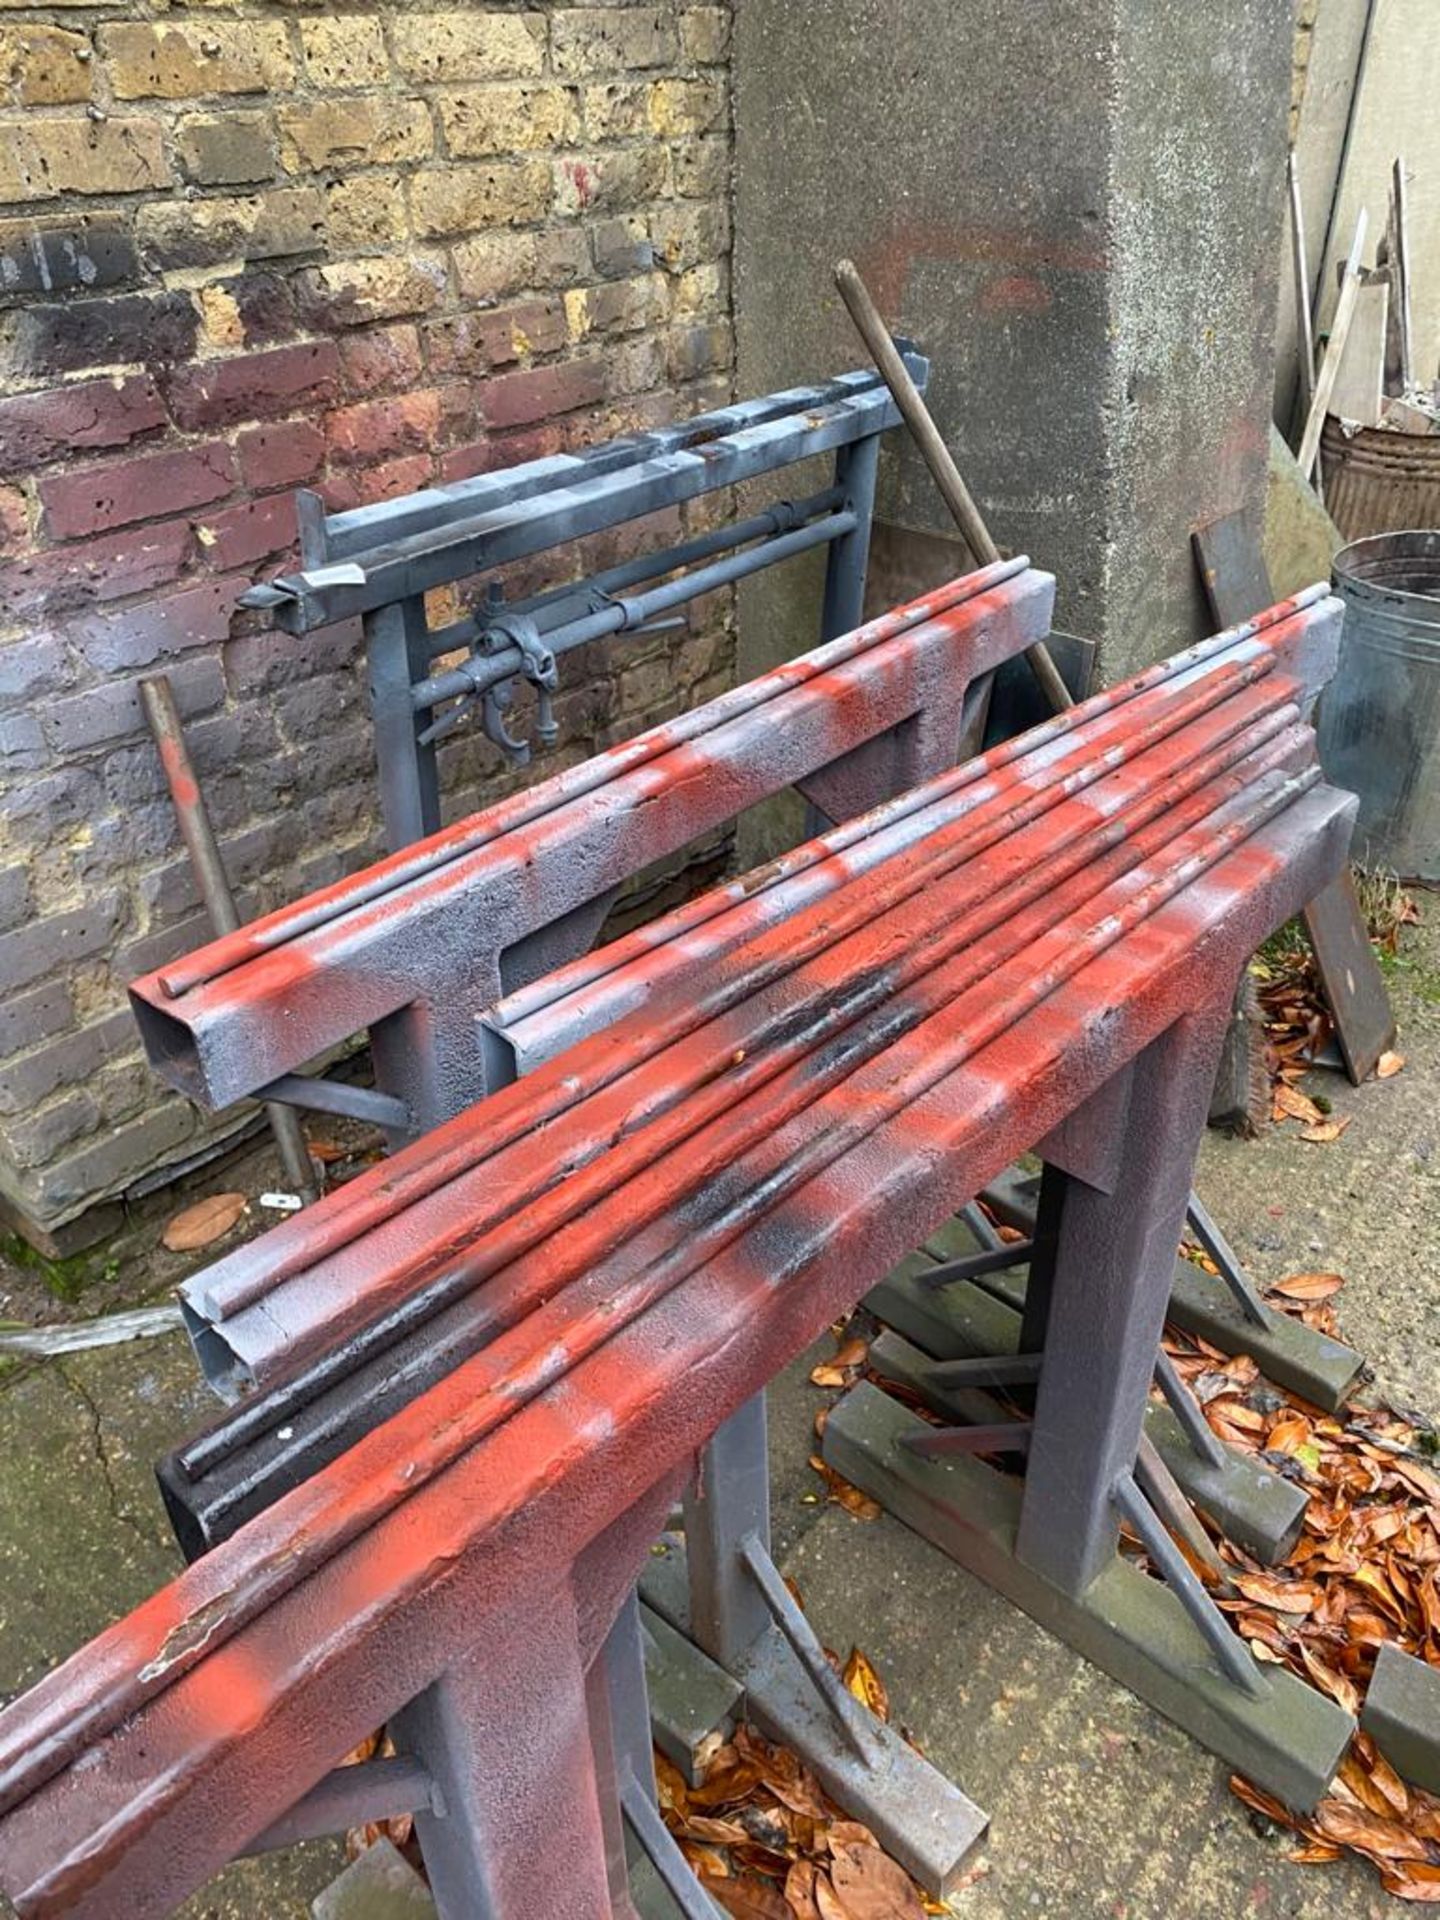 6 x Work Support Tressles Made of Steel - Various Sizes Included But General Size is Approx 130cm - Image 2 of 2